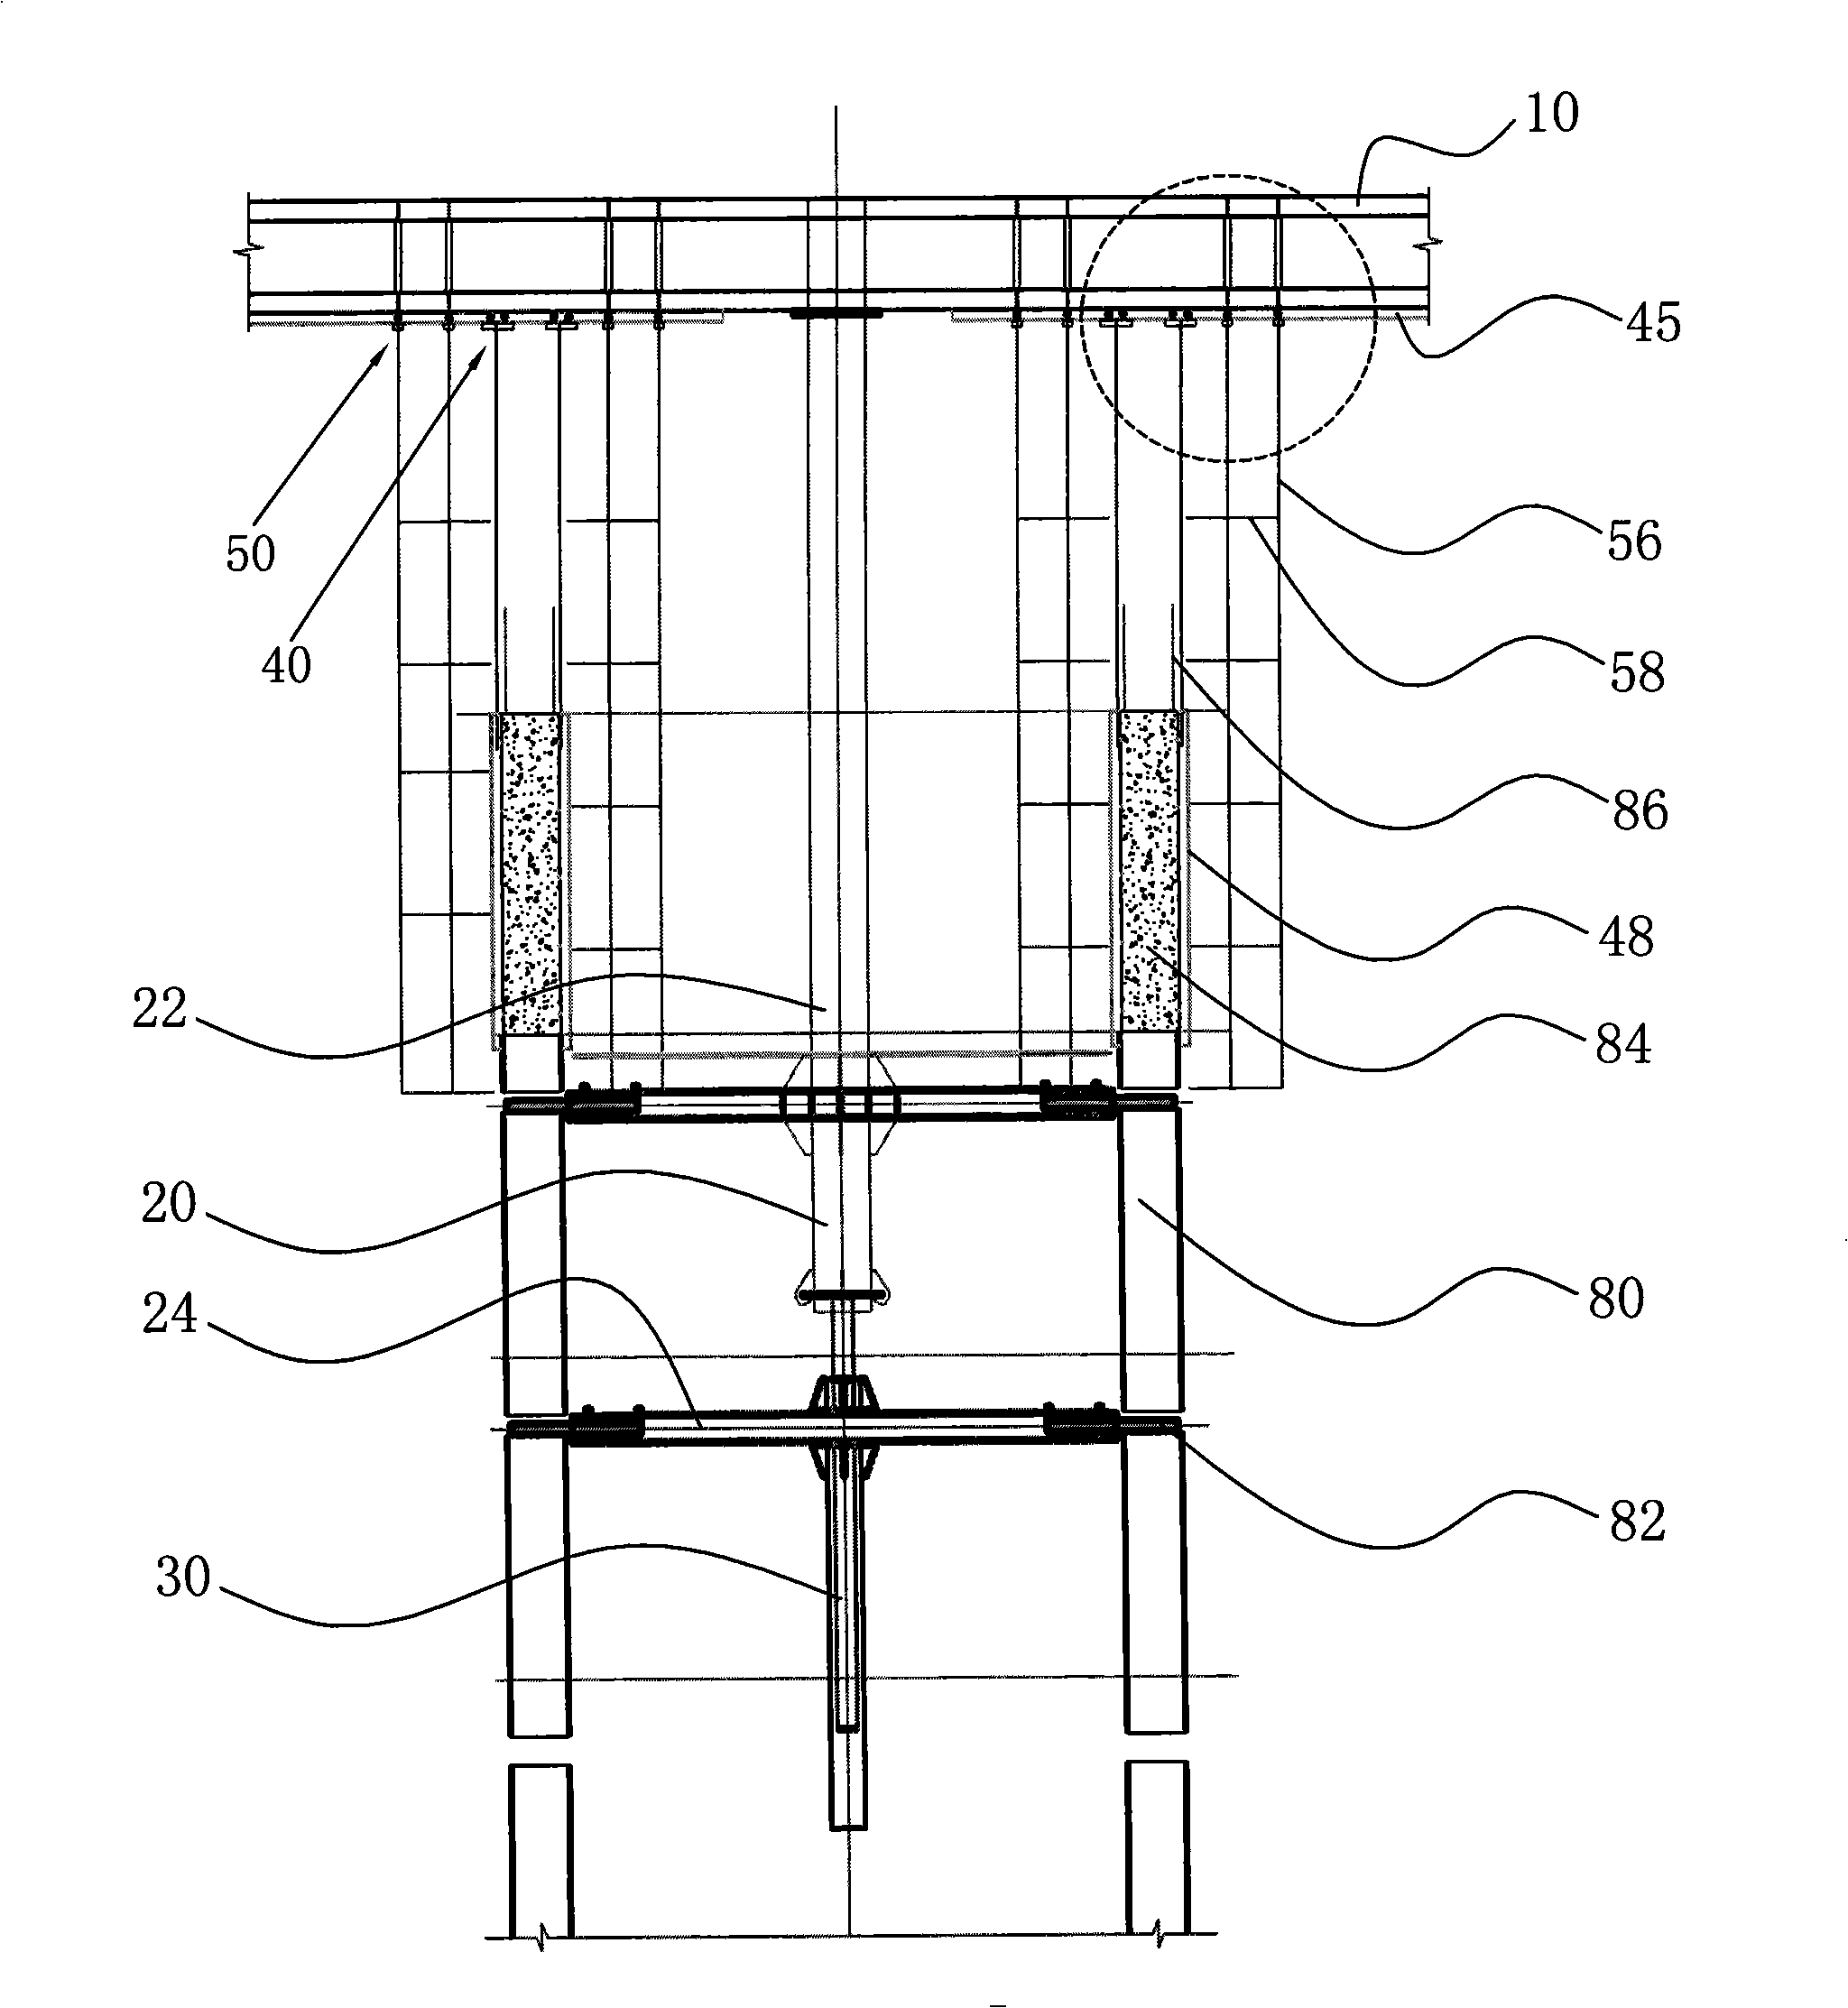 Multifunctional variable integral hoisting template system